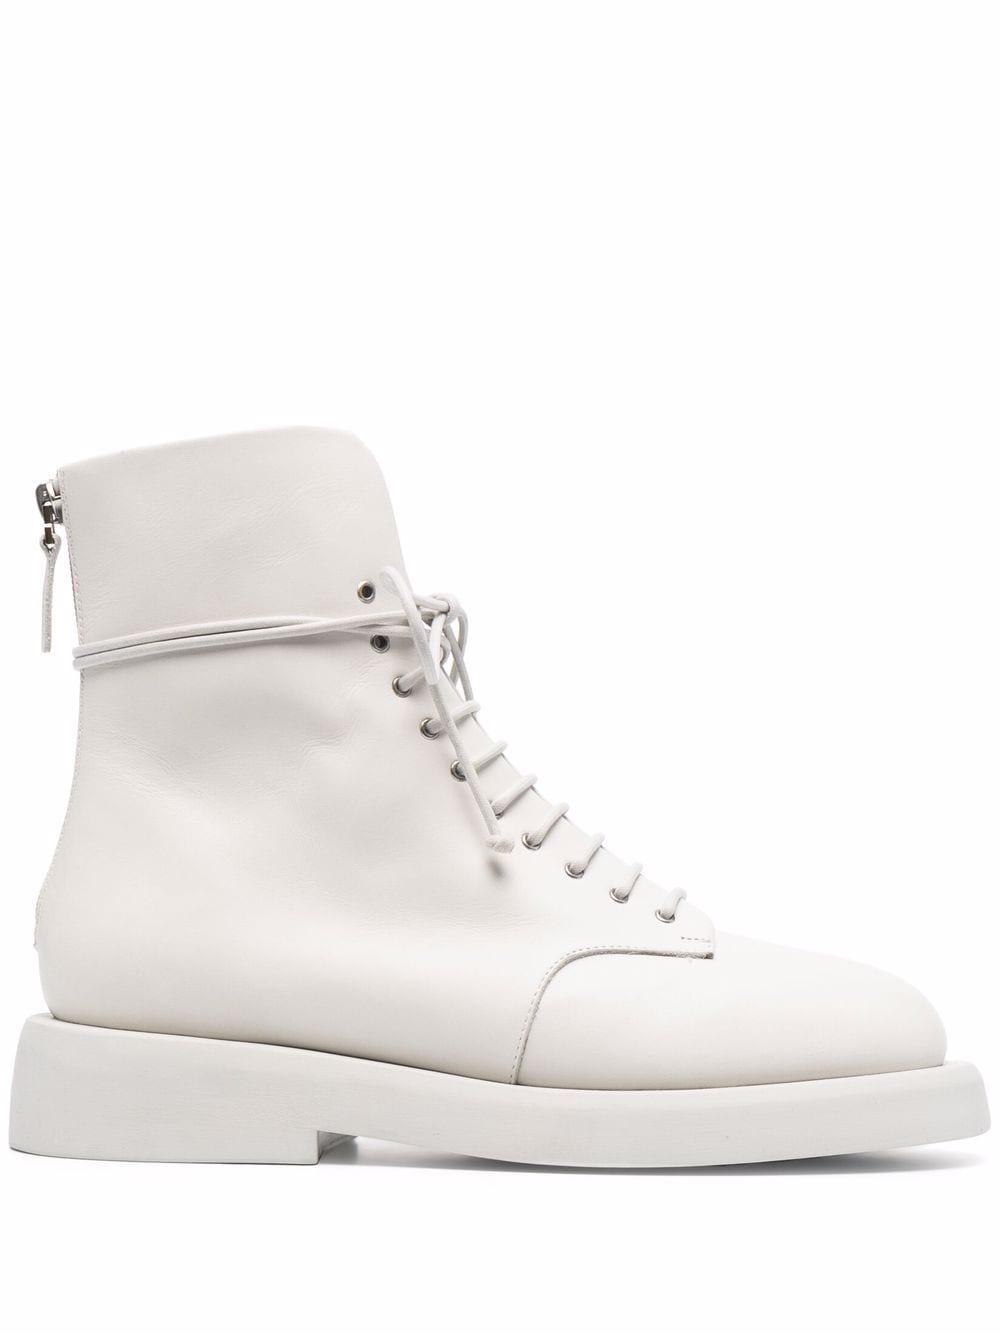 Marsèll lace-up leather ankle boots - White von Marsèll